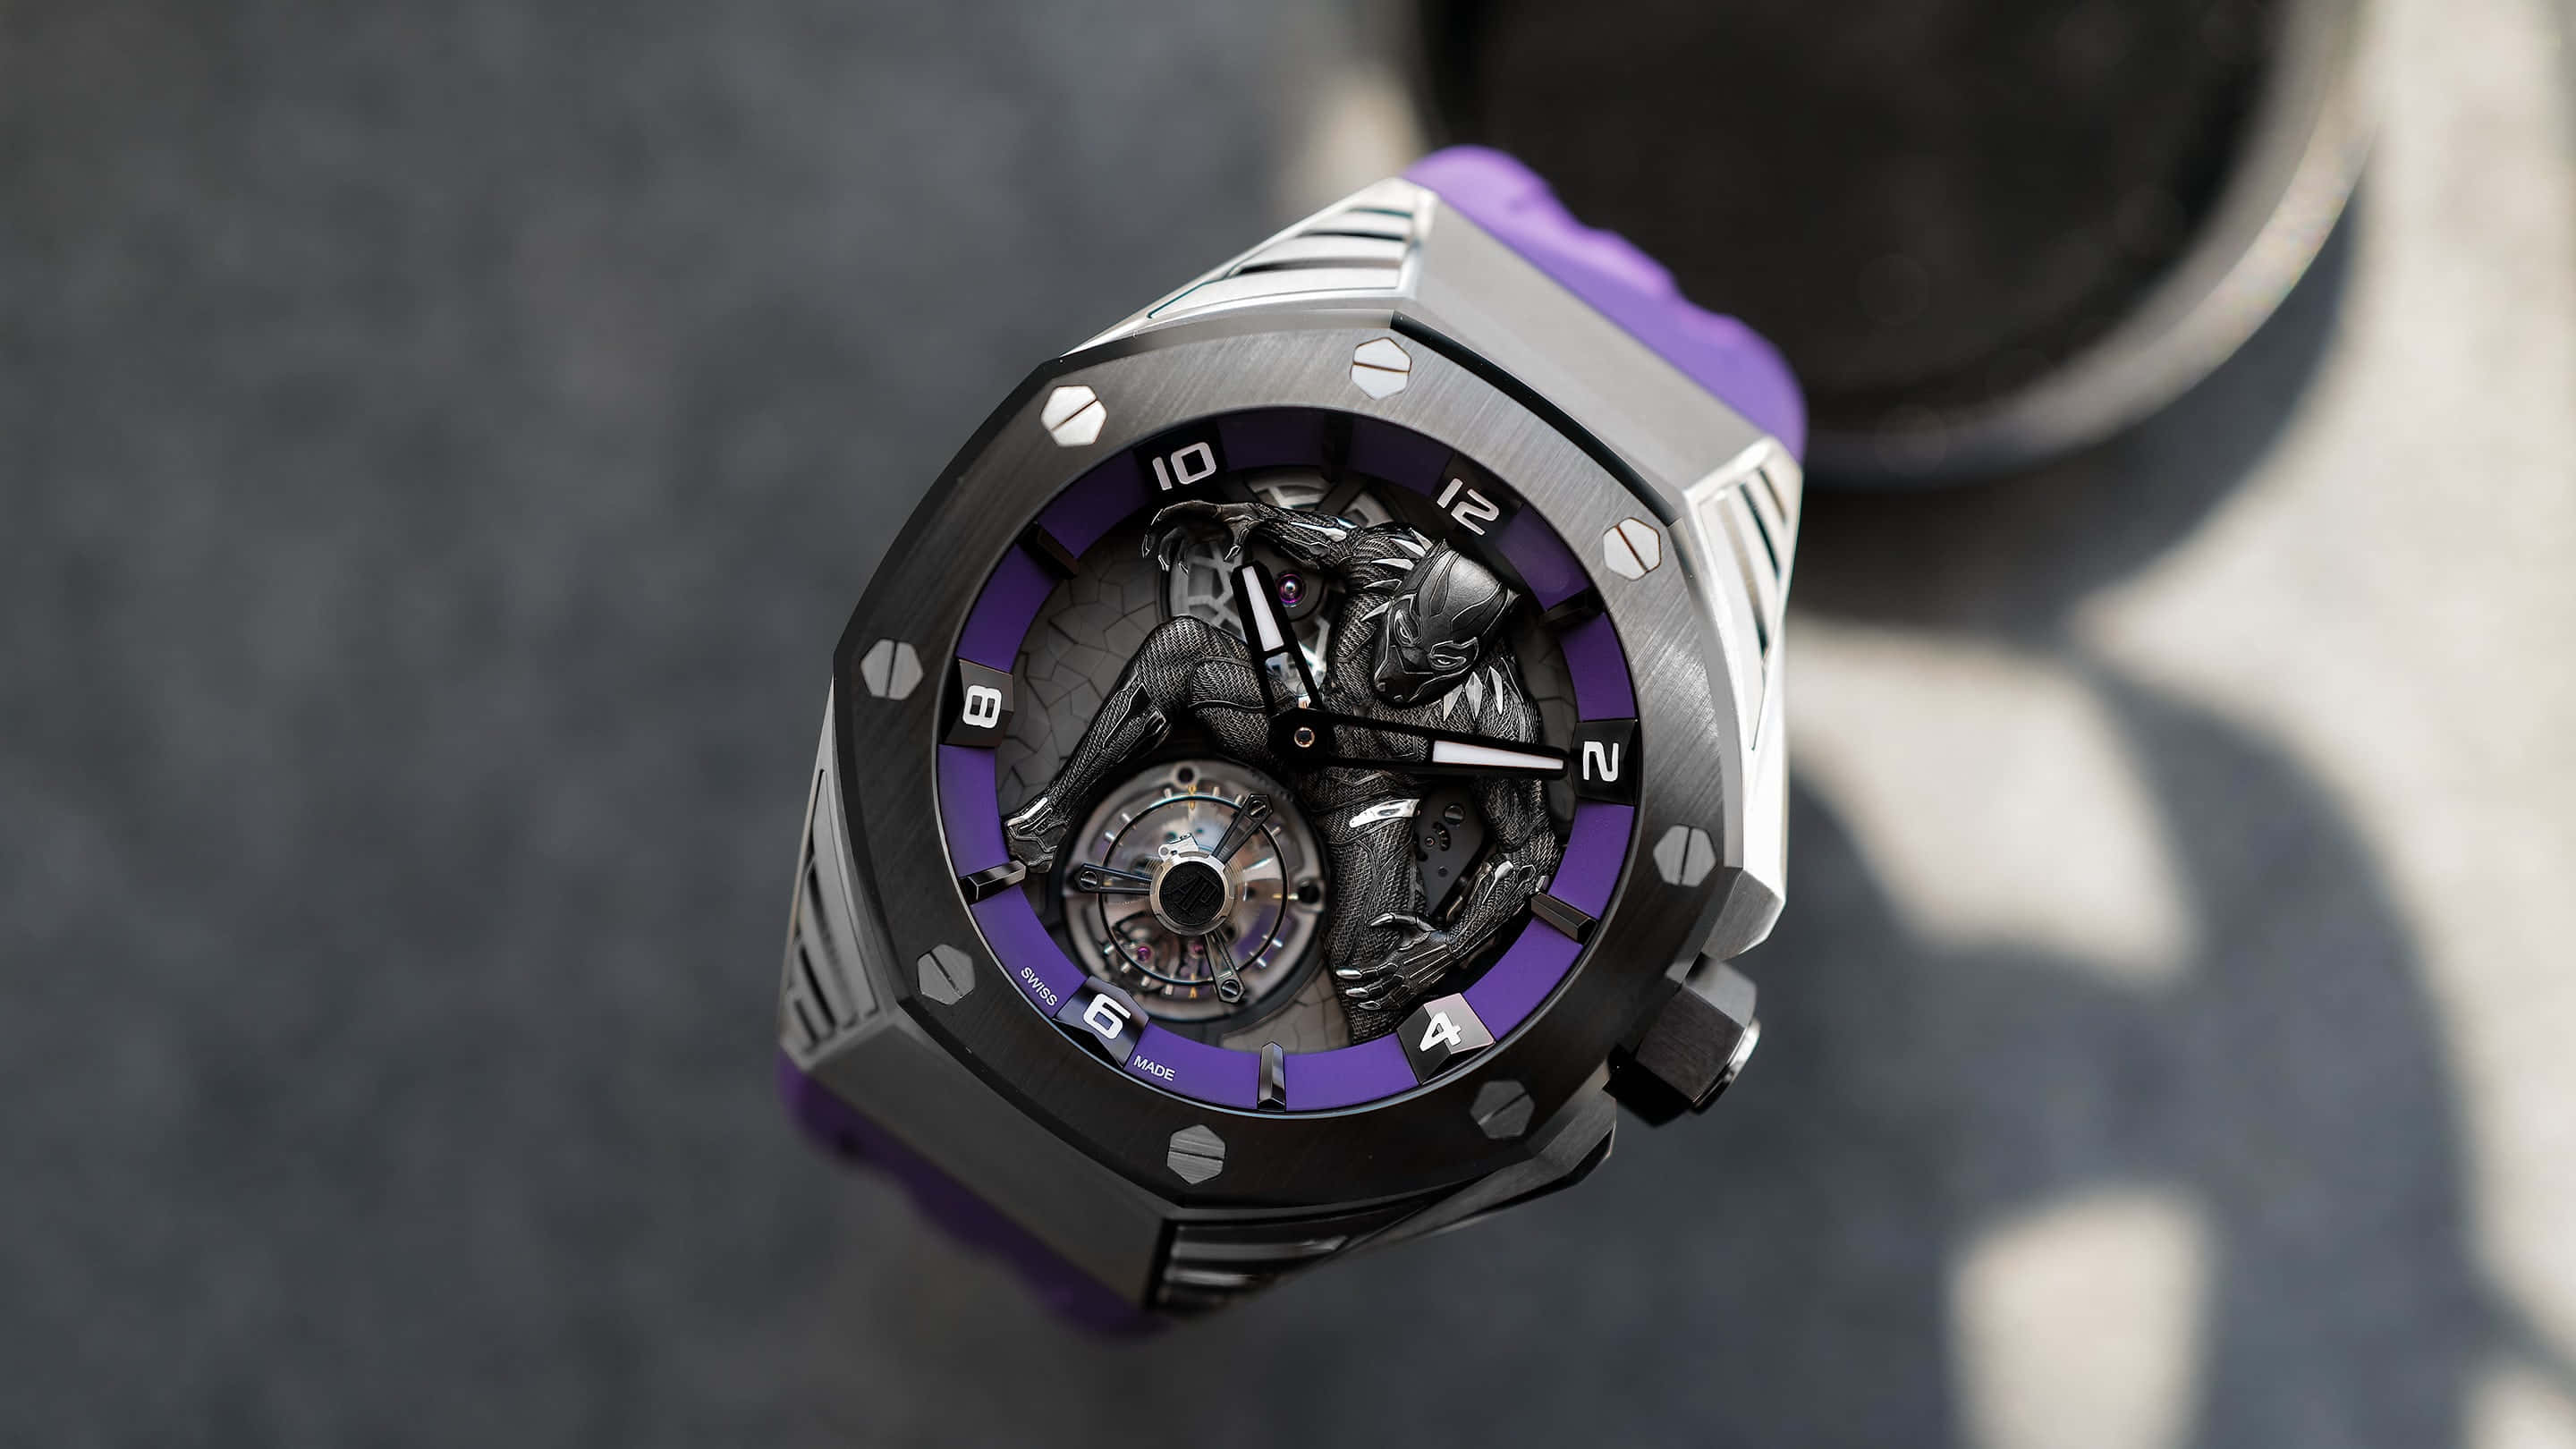 Accessorize with Style. Add a Pop of Color With a Fun and Vibrant Purple Watch. Wallpaper